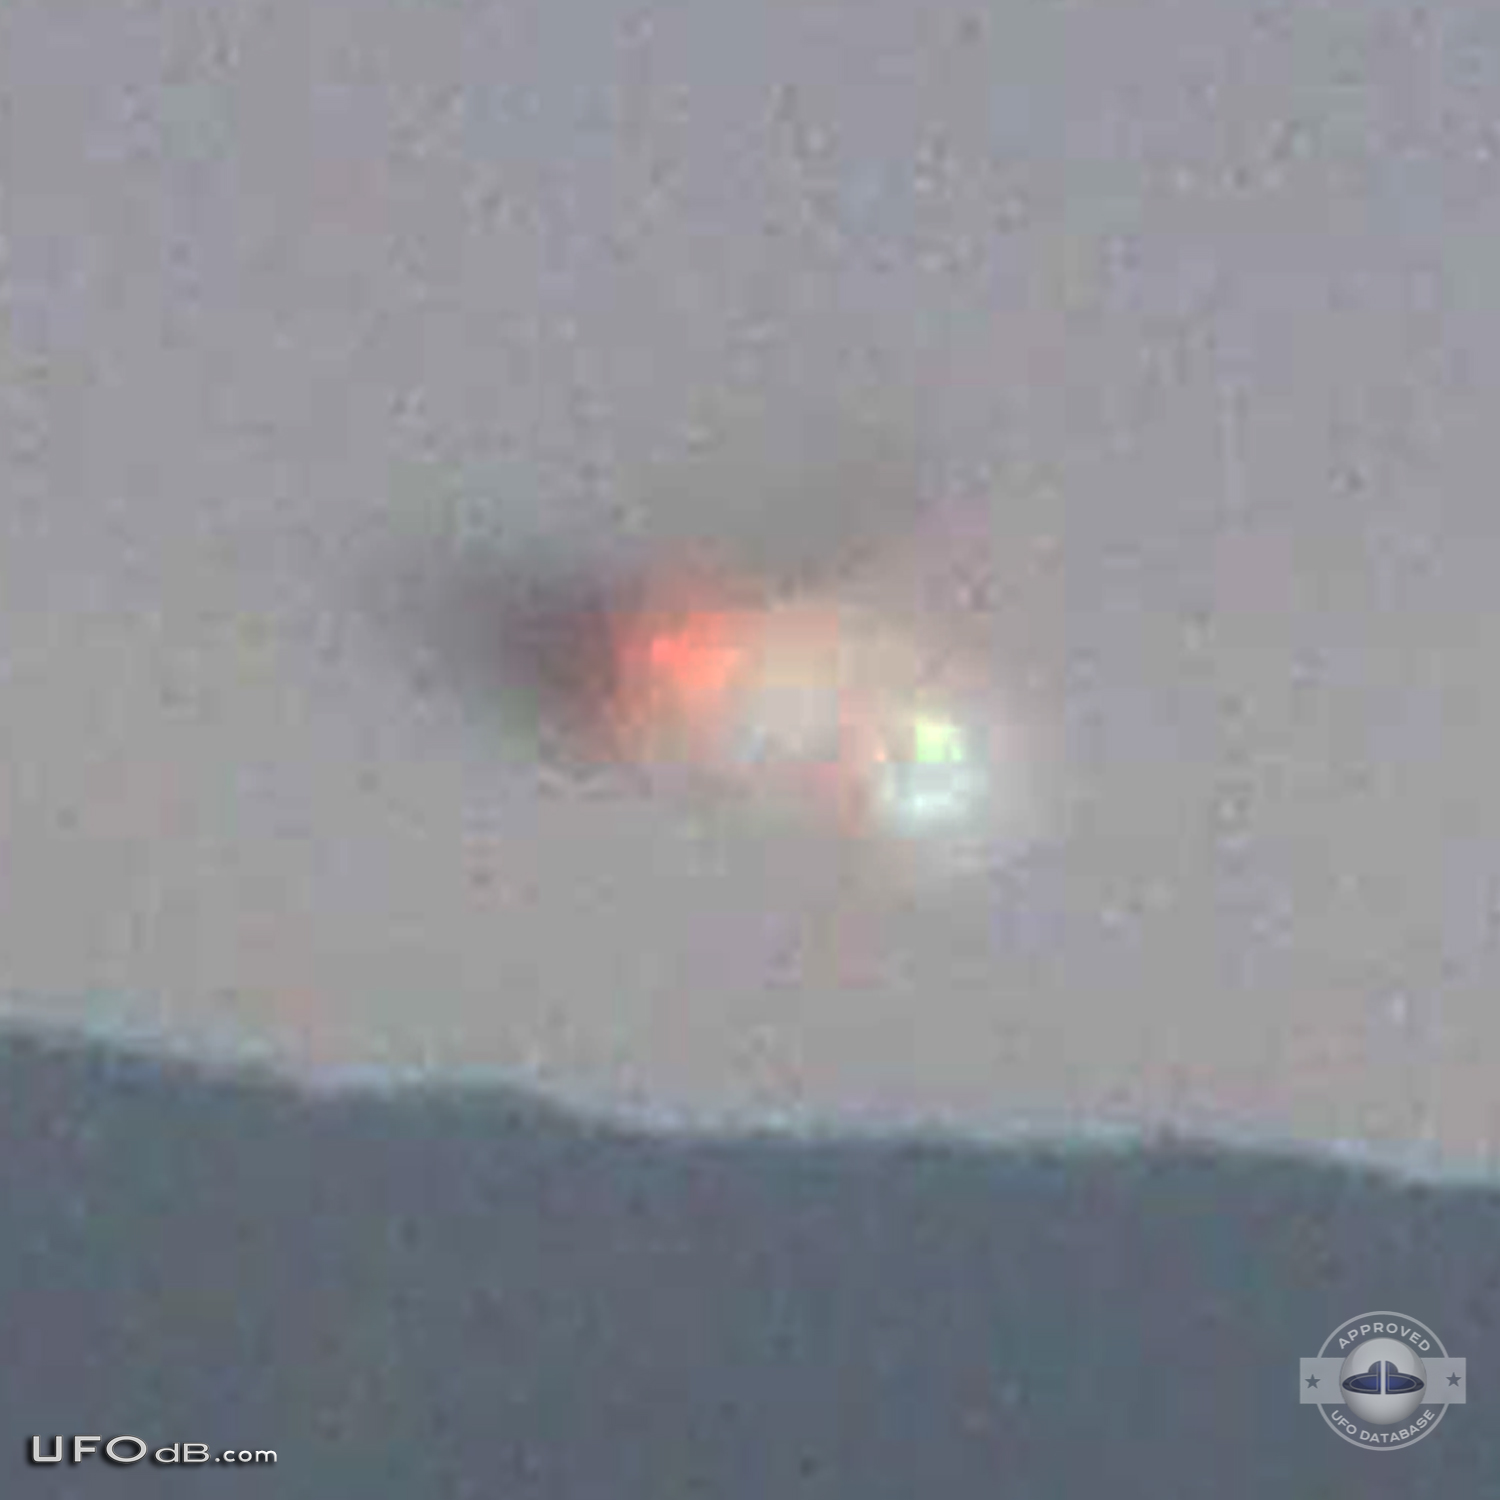 Two ufo pictures taken in the high mountains - Puerto Rico - July 2011 UFO Picture #376-7